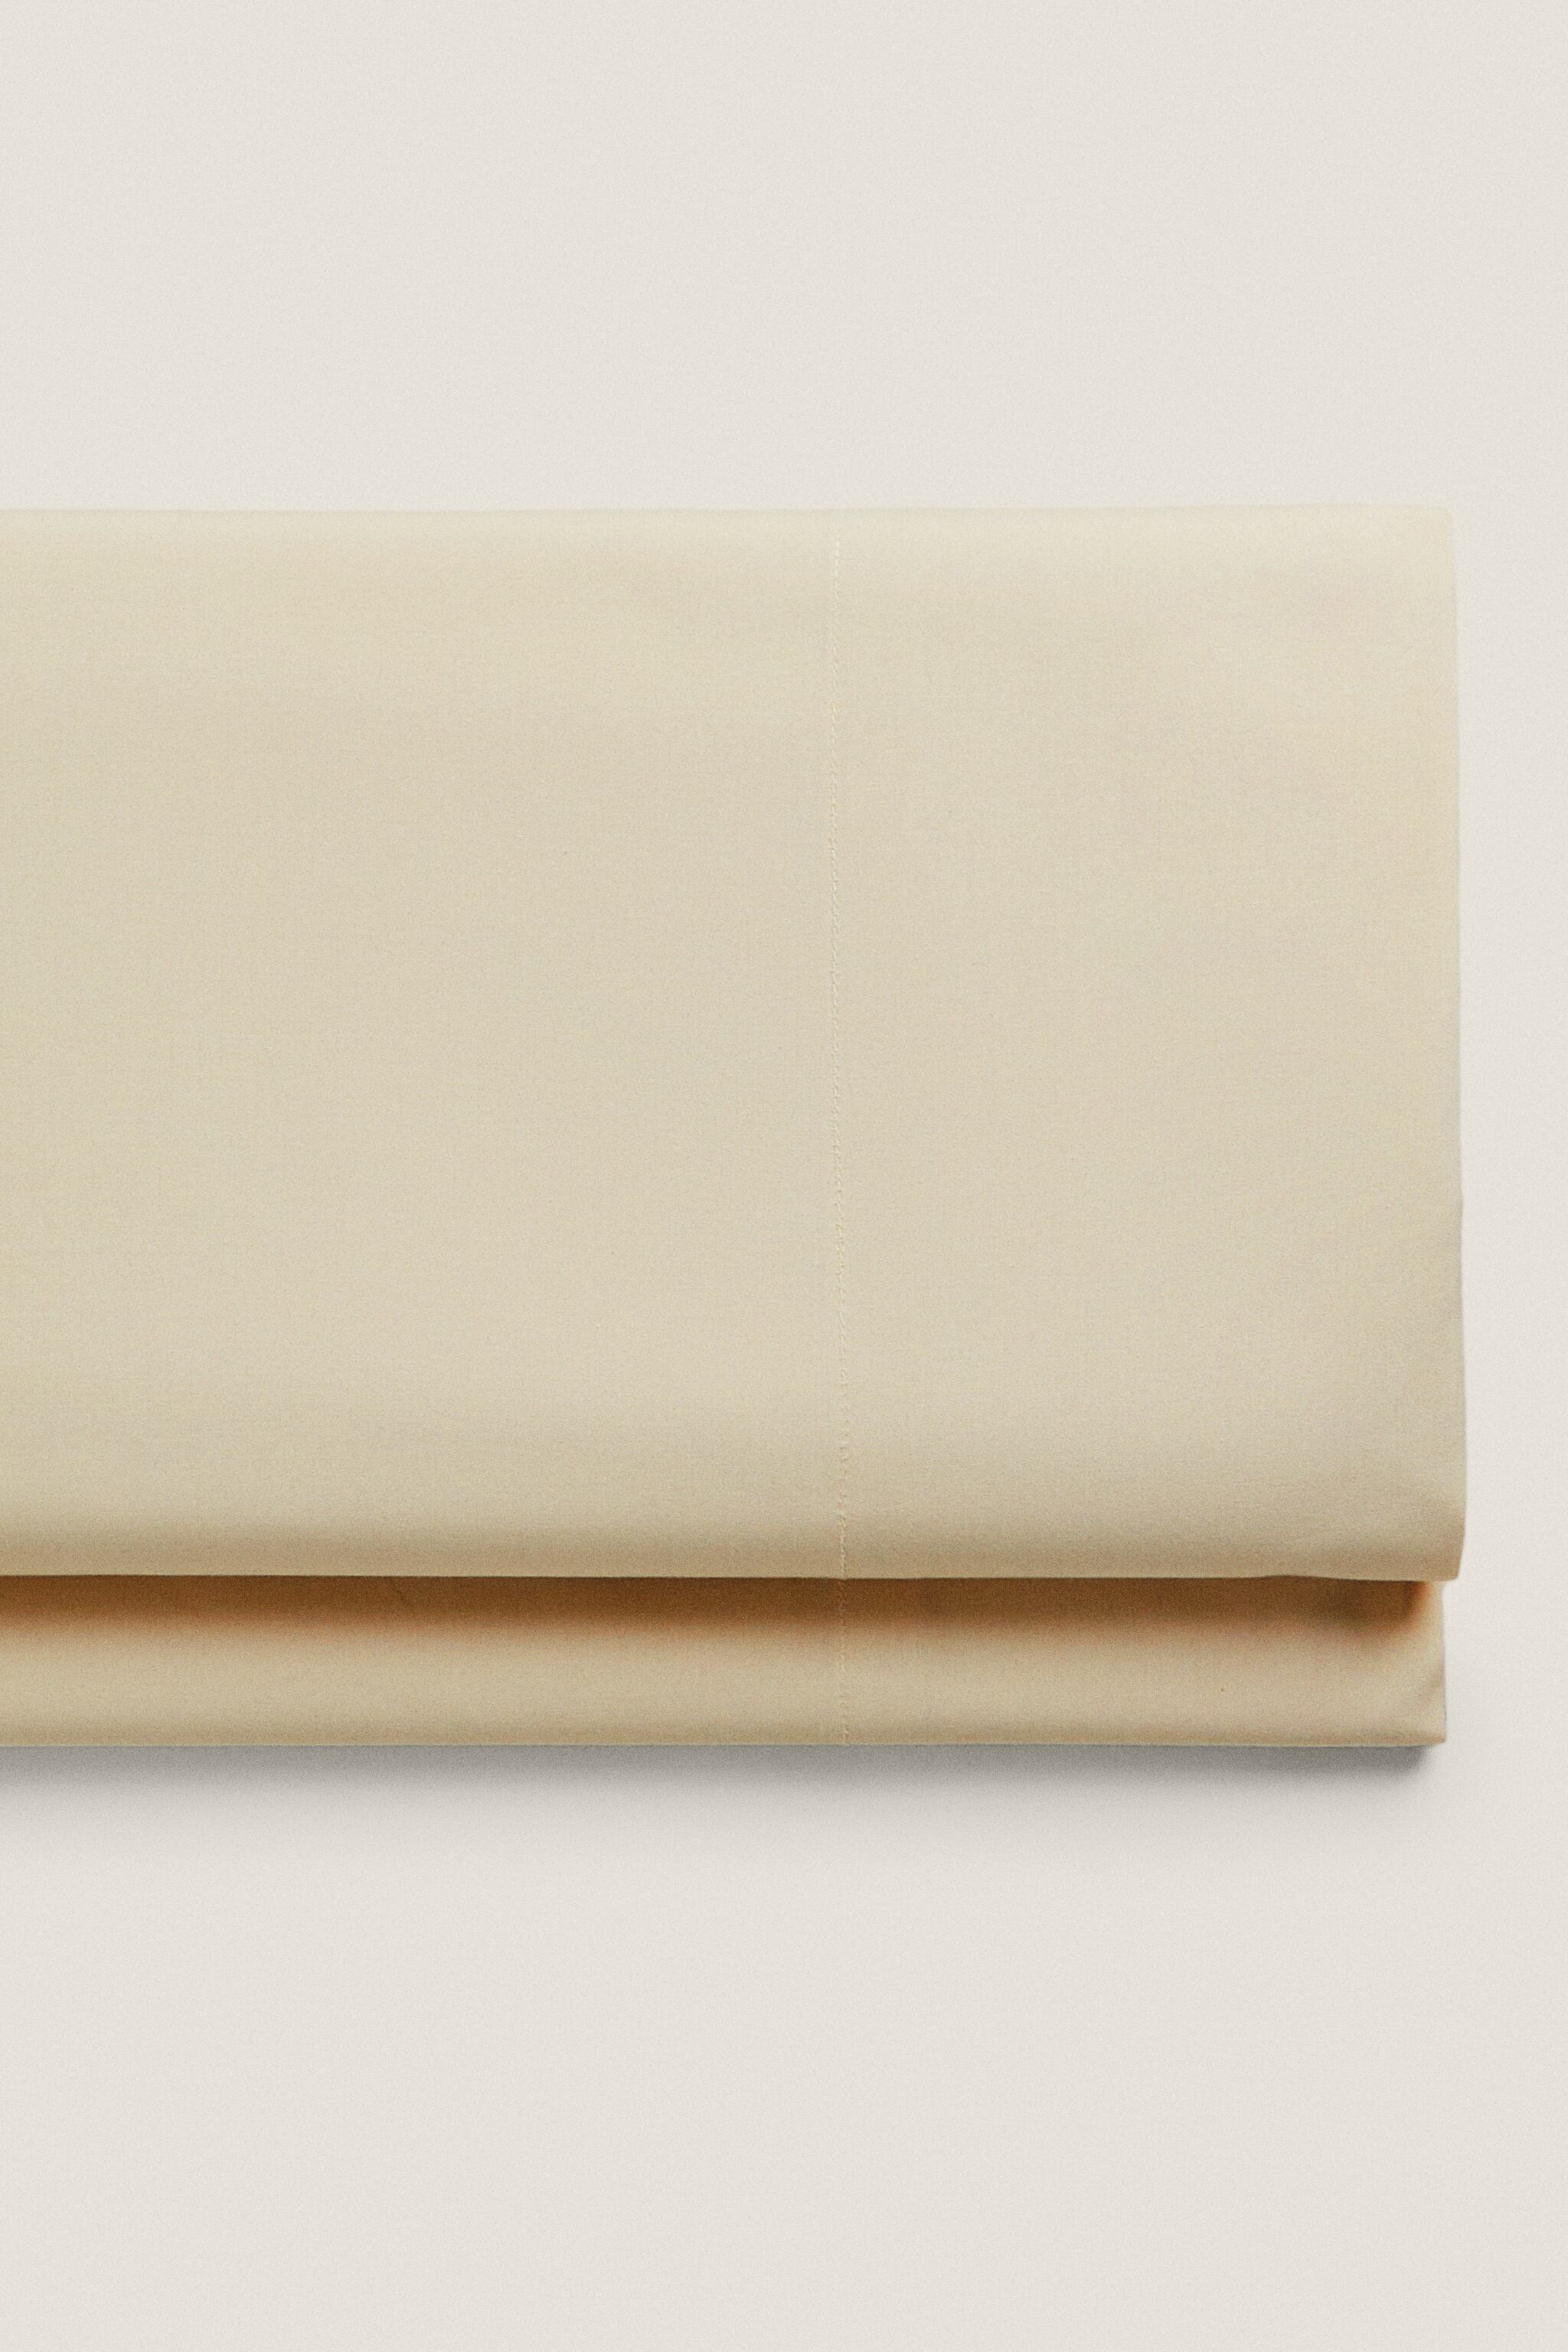 THREAD COUNT) PERCALE FLAT SHEET